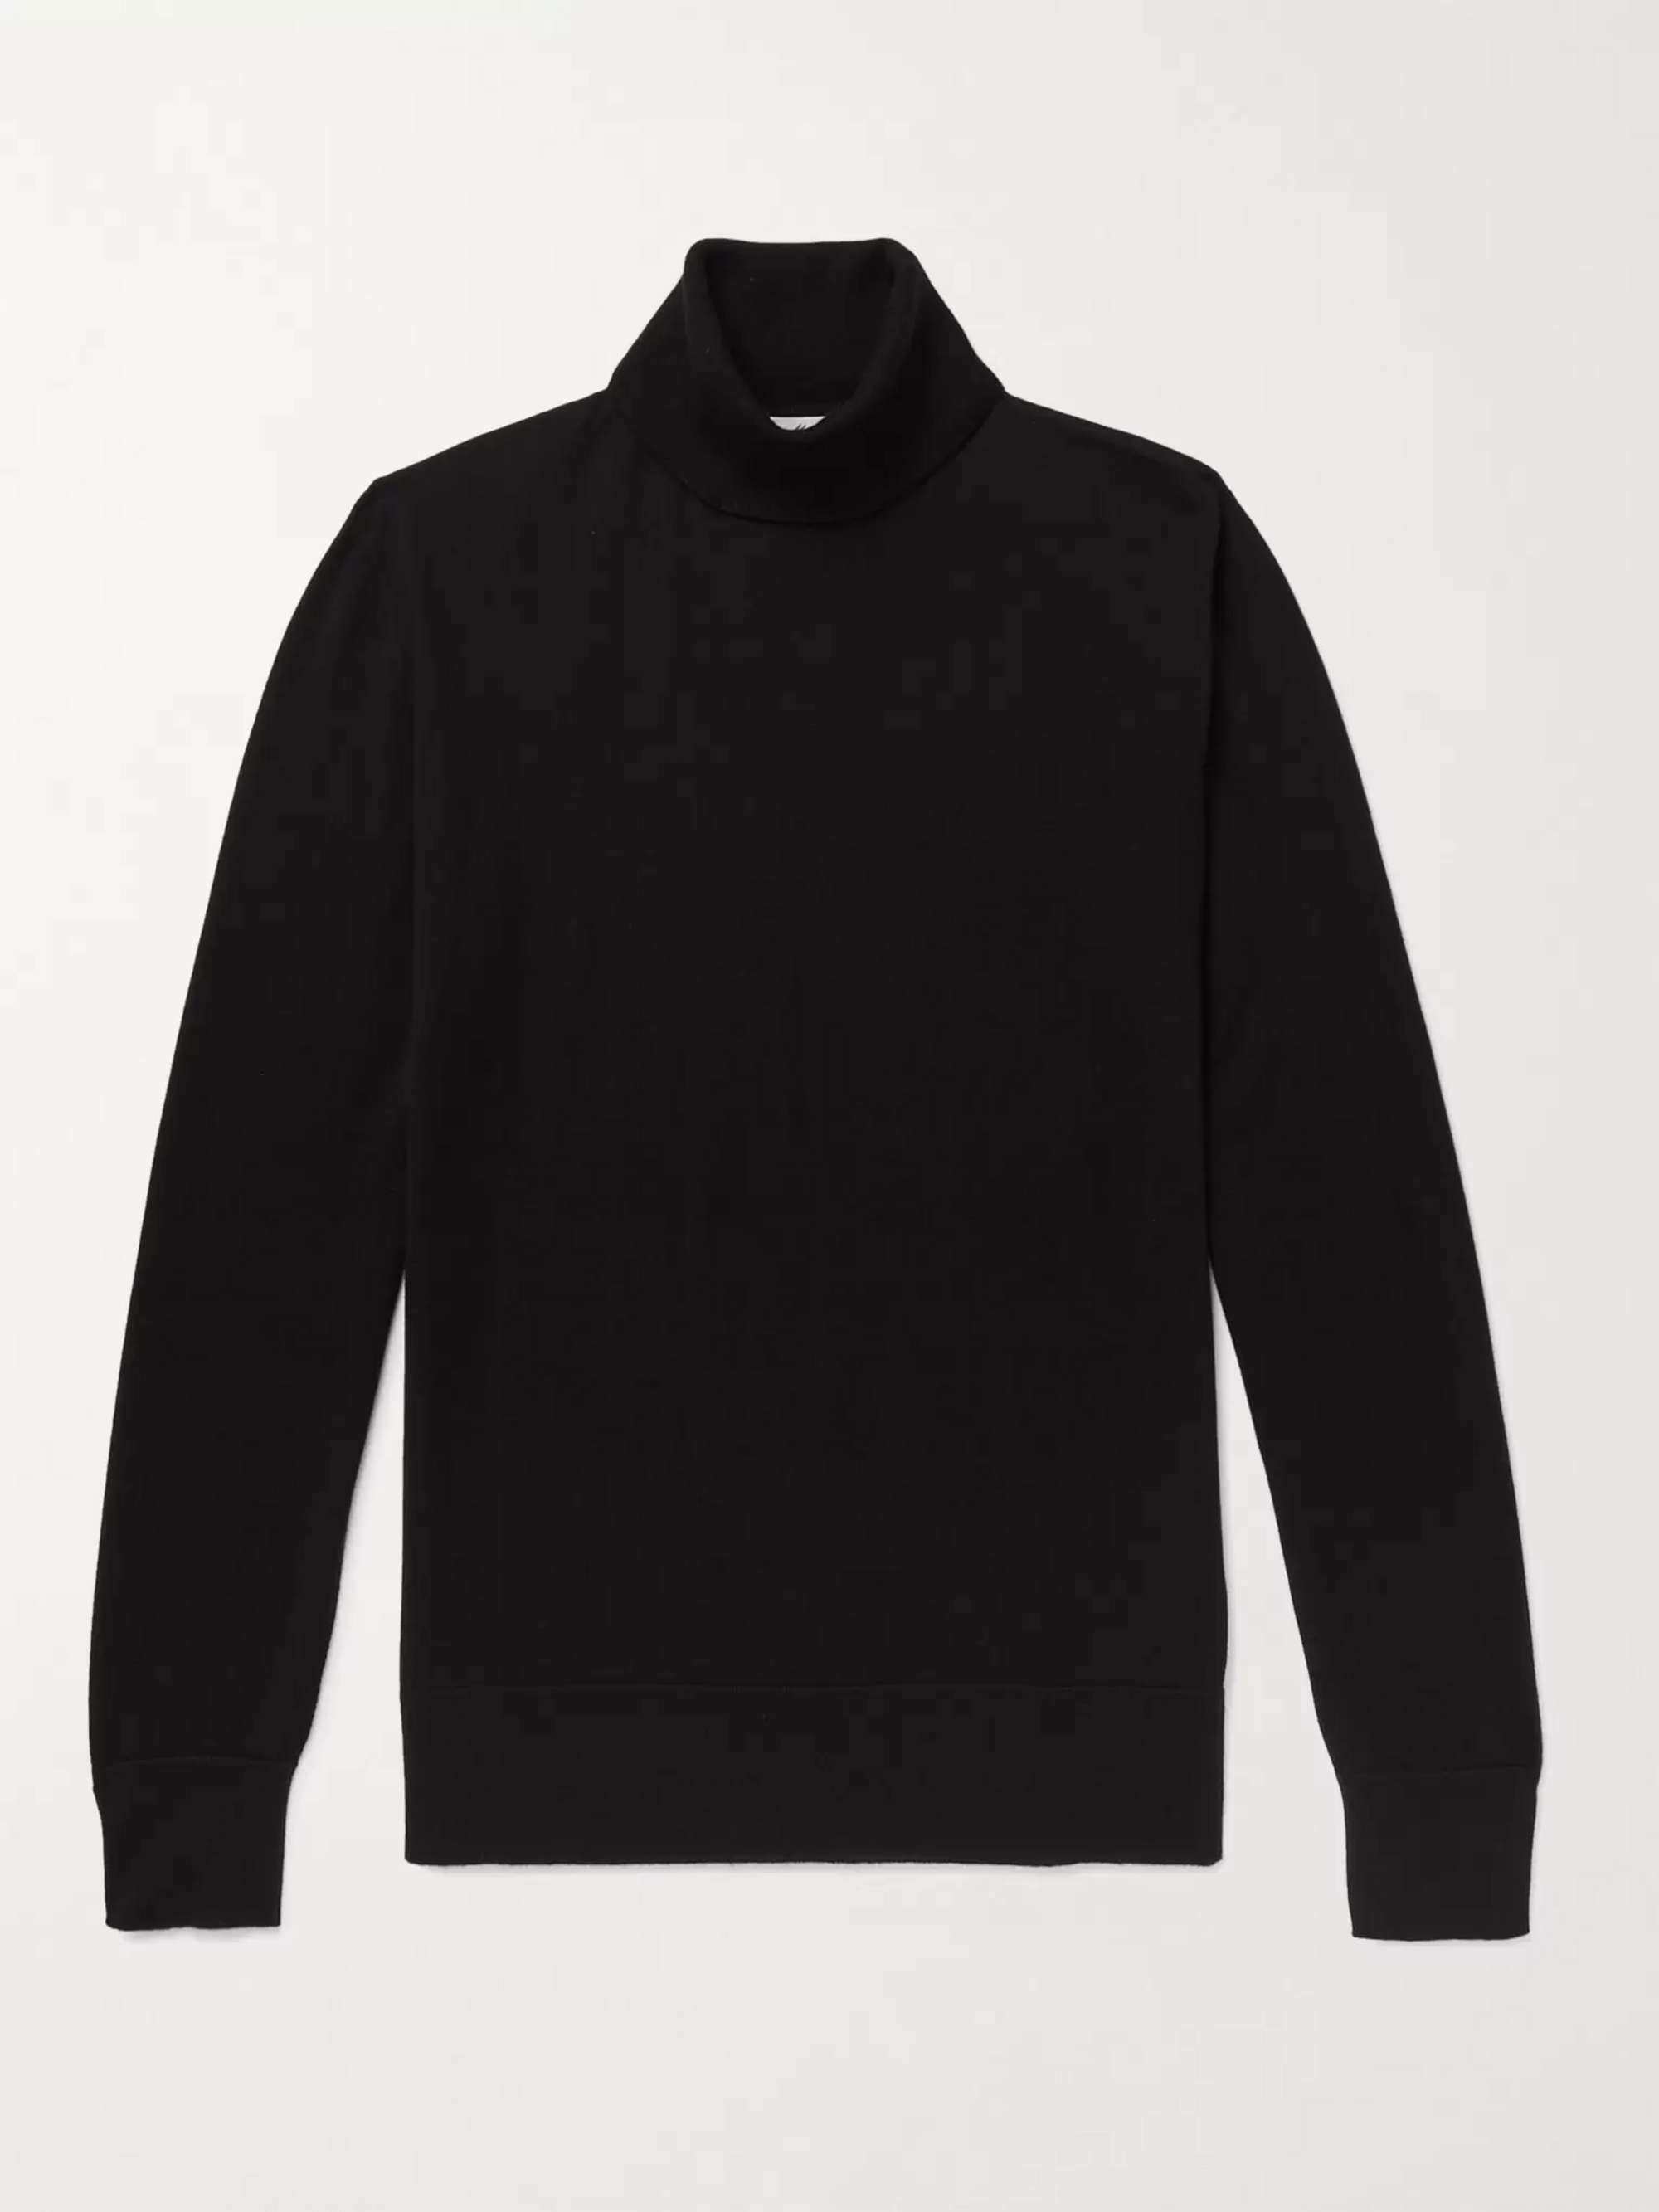 MR P. Slim-Fit Cashmere and Silk-Blend Rollneck Sweater